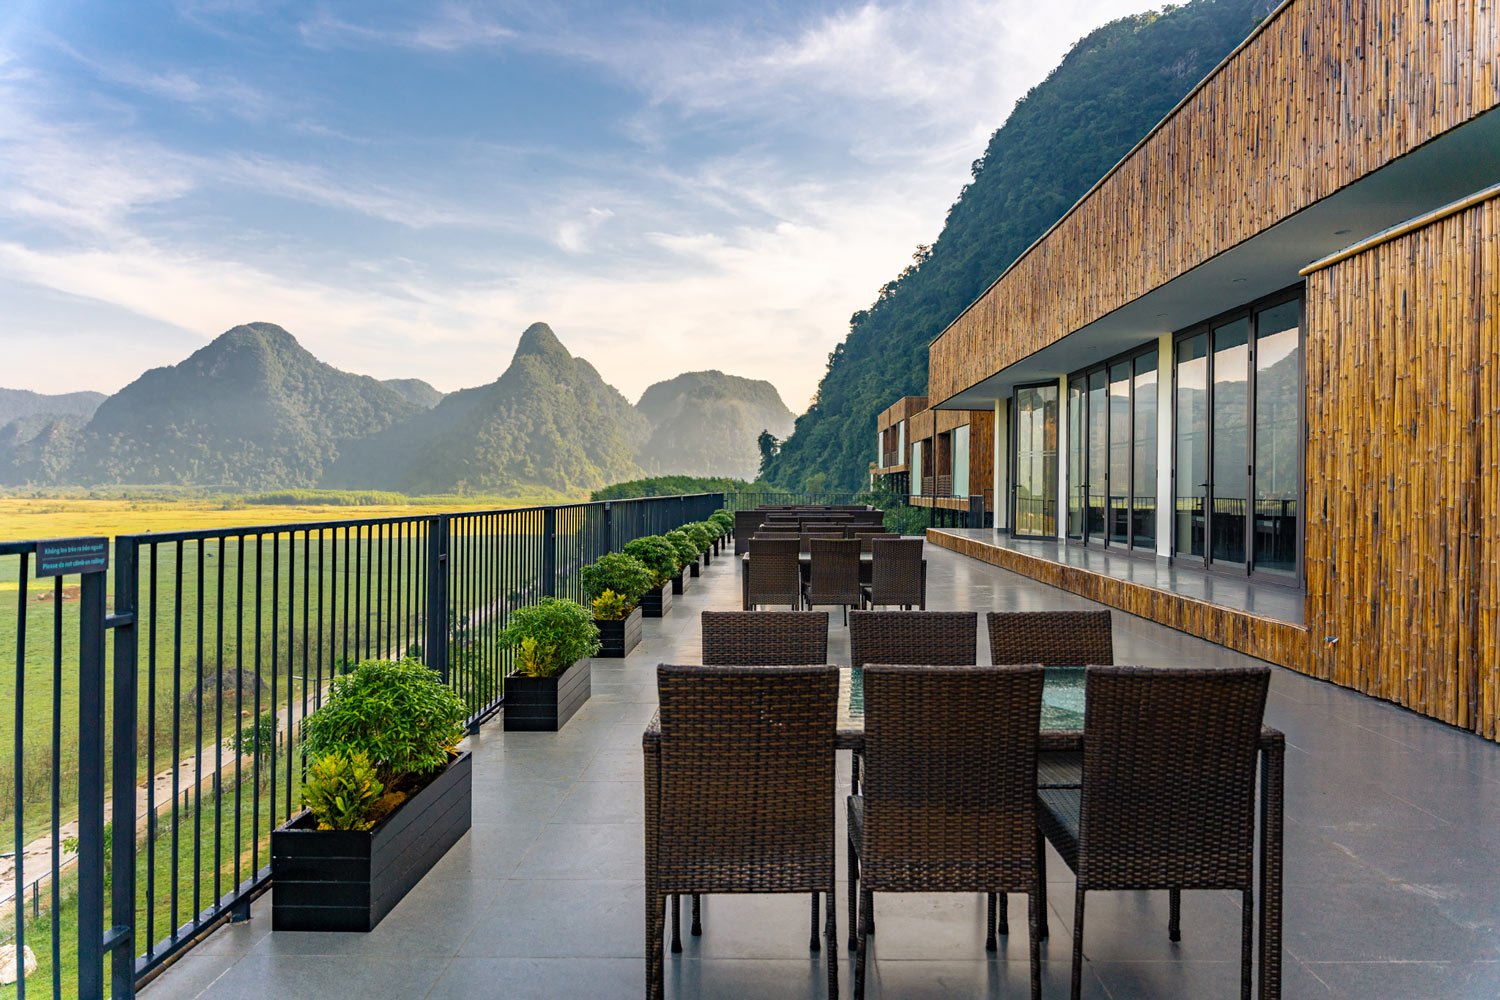 The restaurant offers stunning views of the rolling fields and the distant mountains.